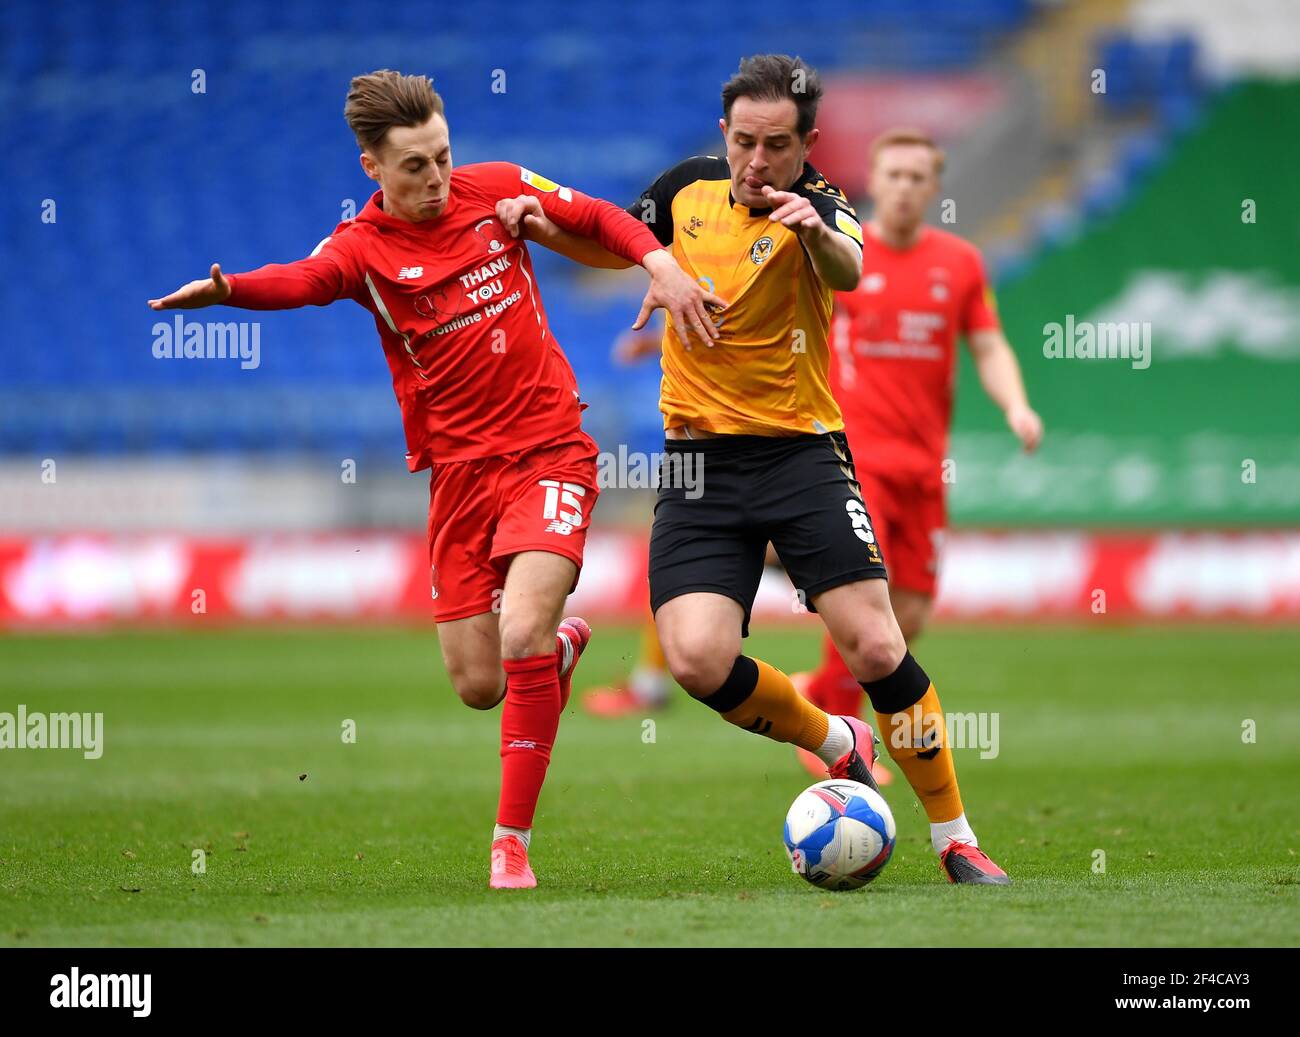 Leyton Orient's Daniel Kemp (left) and Newport County's Matt Dolan battle for the ball during the Sky Bet League Two match at the Cardiff City Stadium, Cardiff. Picture date: Saturday March 20, 2021. Stock Photo